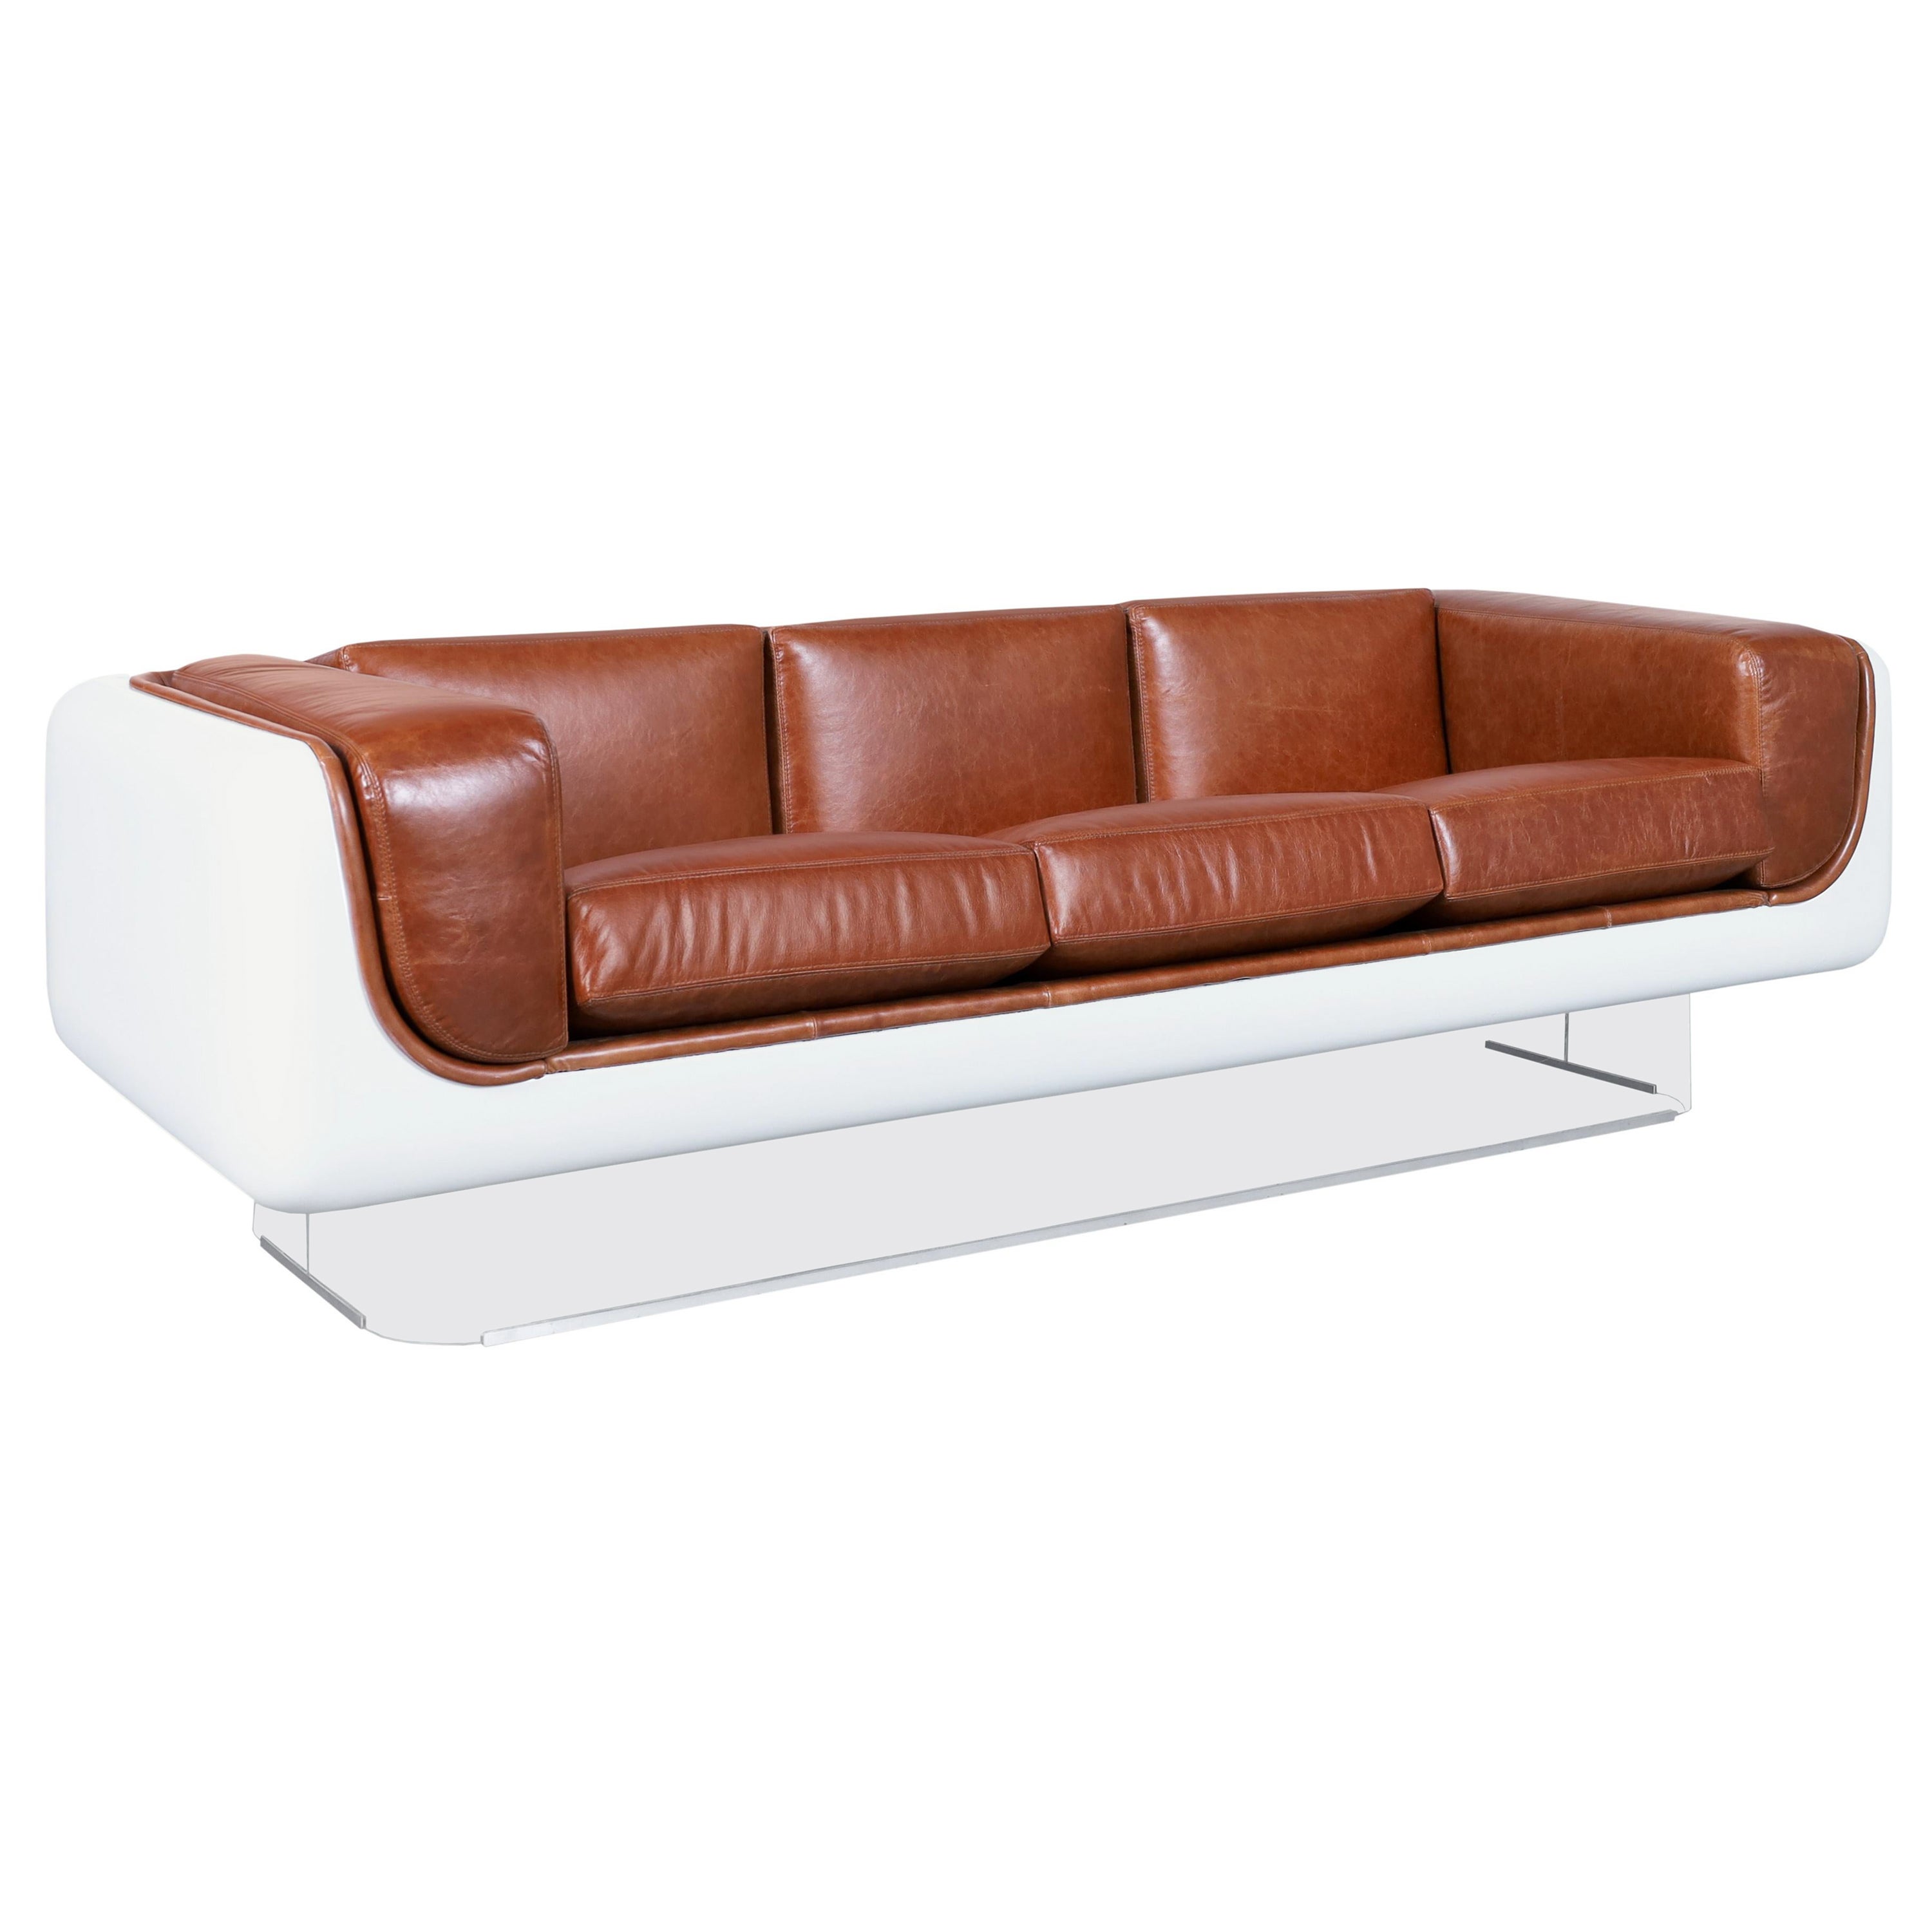 Vintage Leather and Lucite Floating Sofa by William C. Andrus for Steelcase For Sale